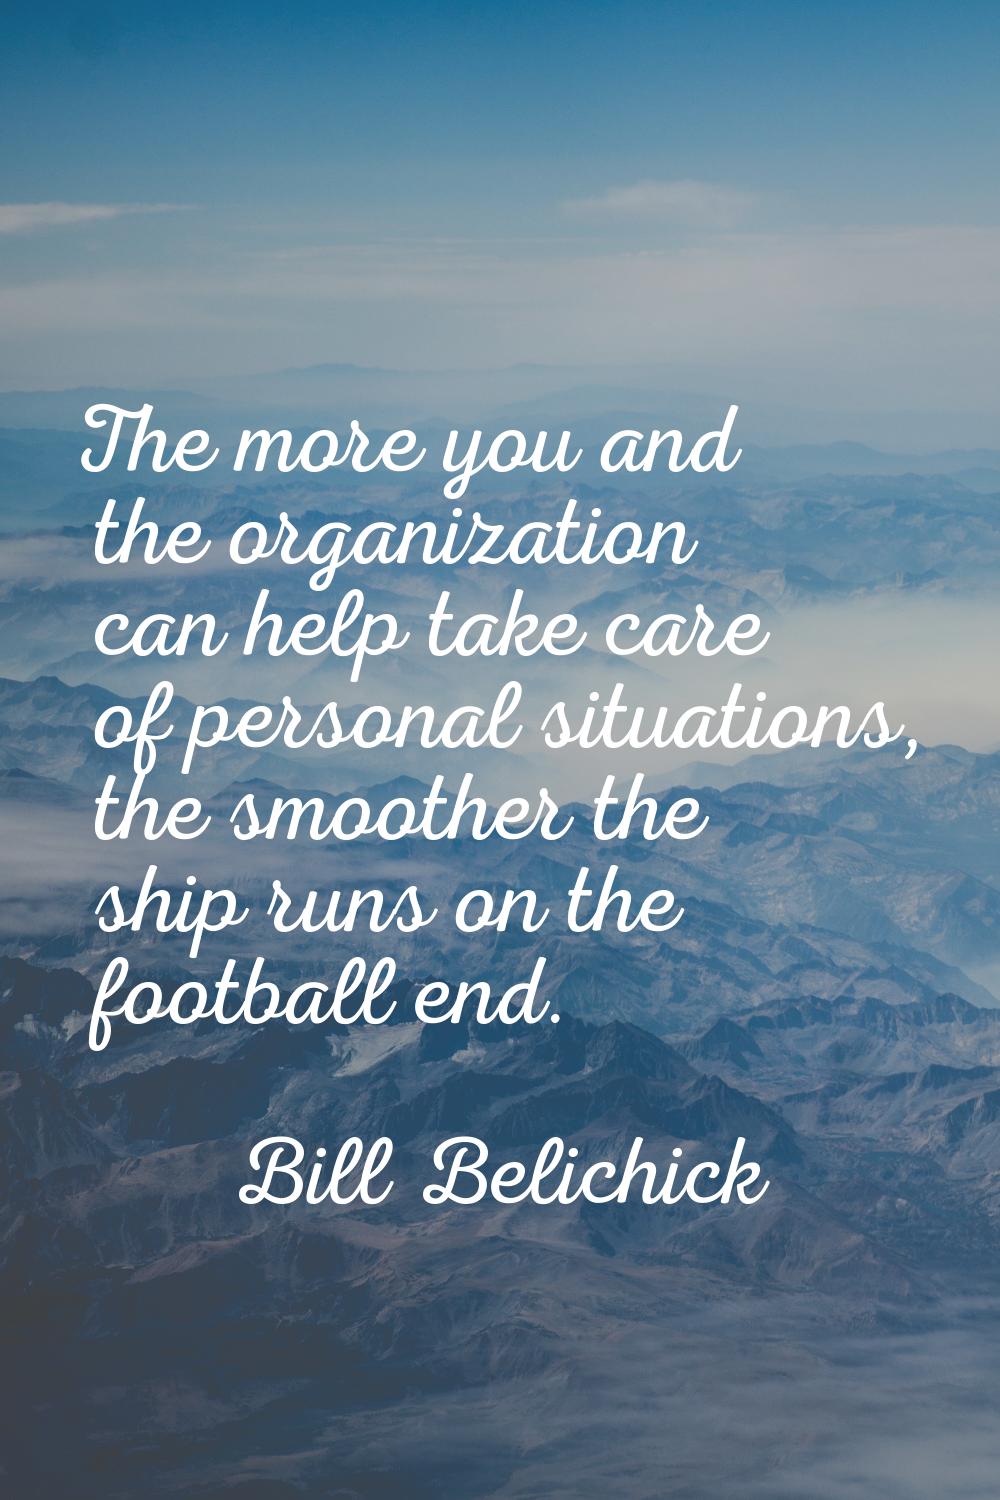 The more you and the organization can help take care of personal situations, the smoother the ship 